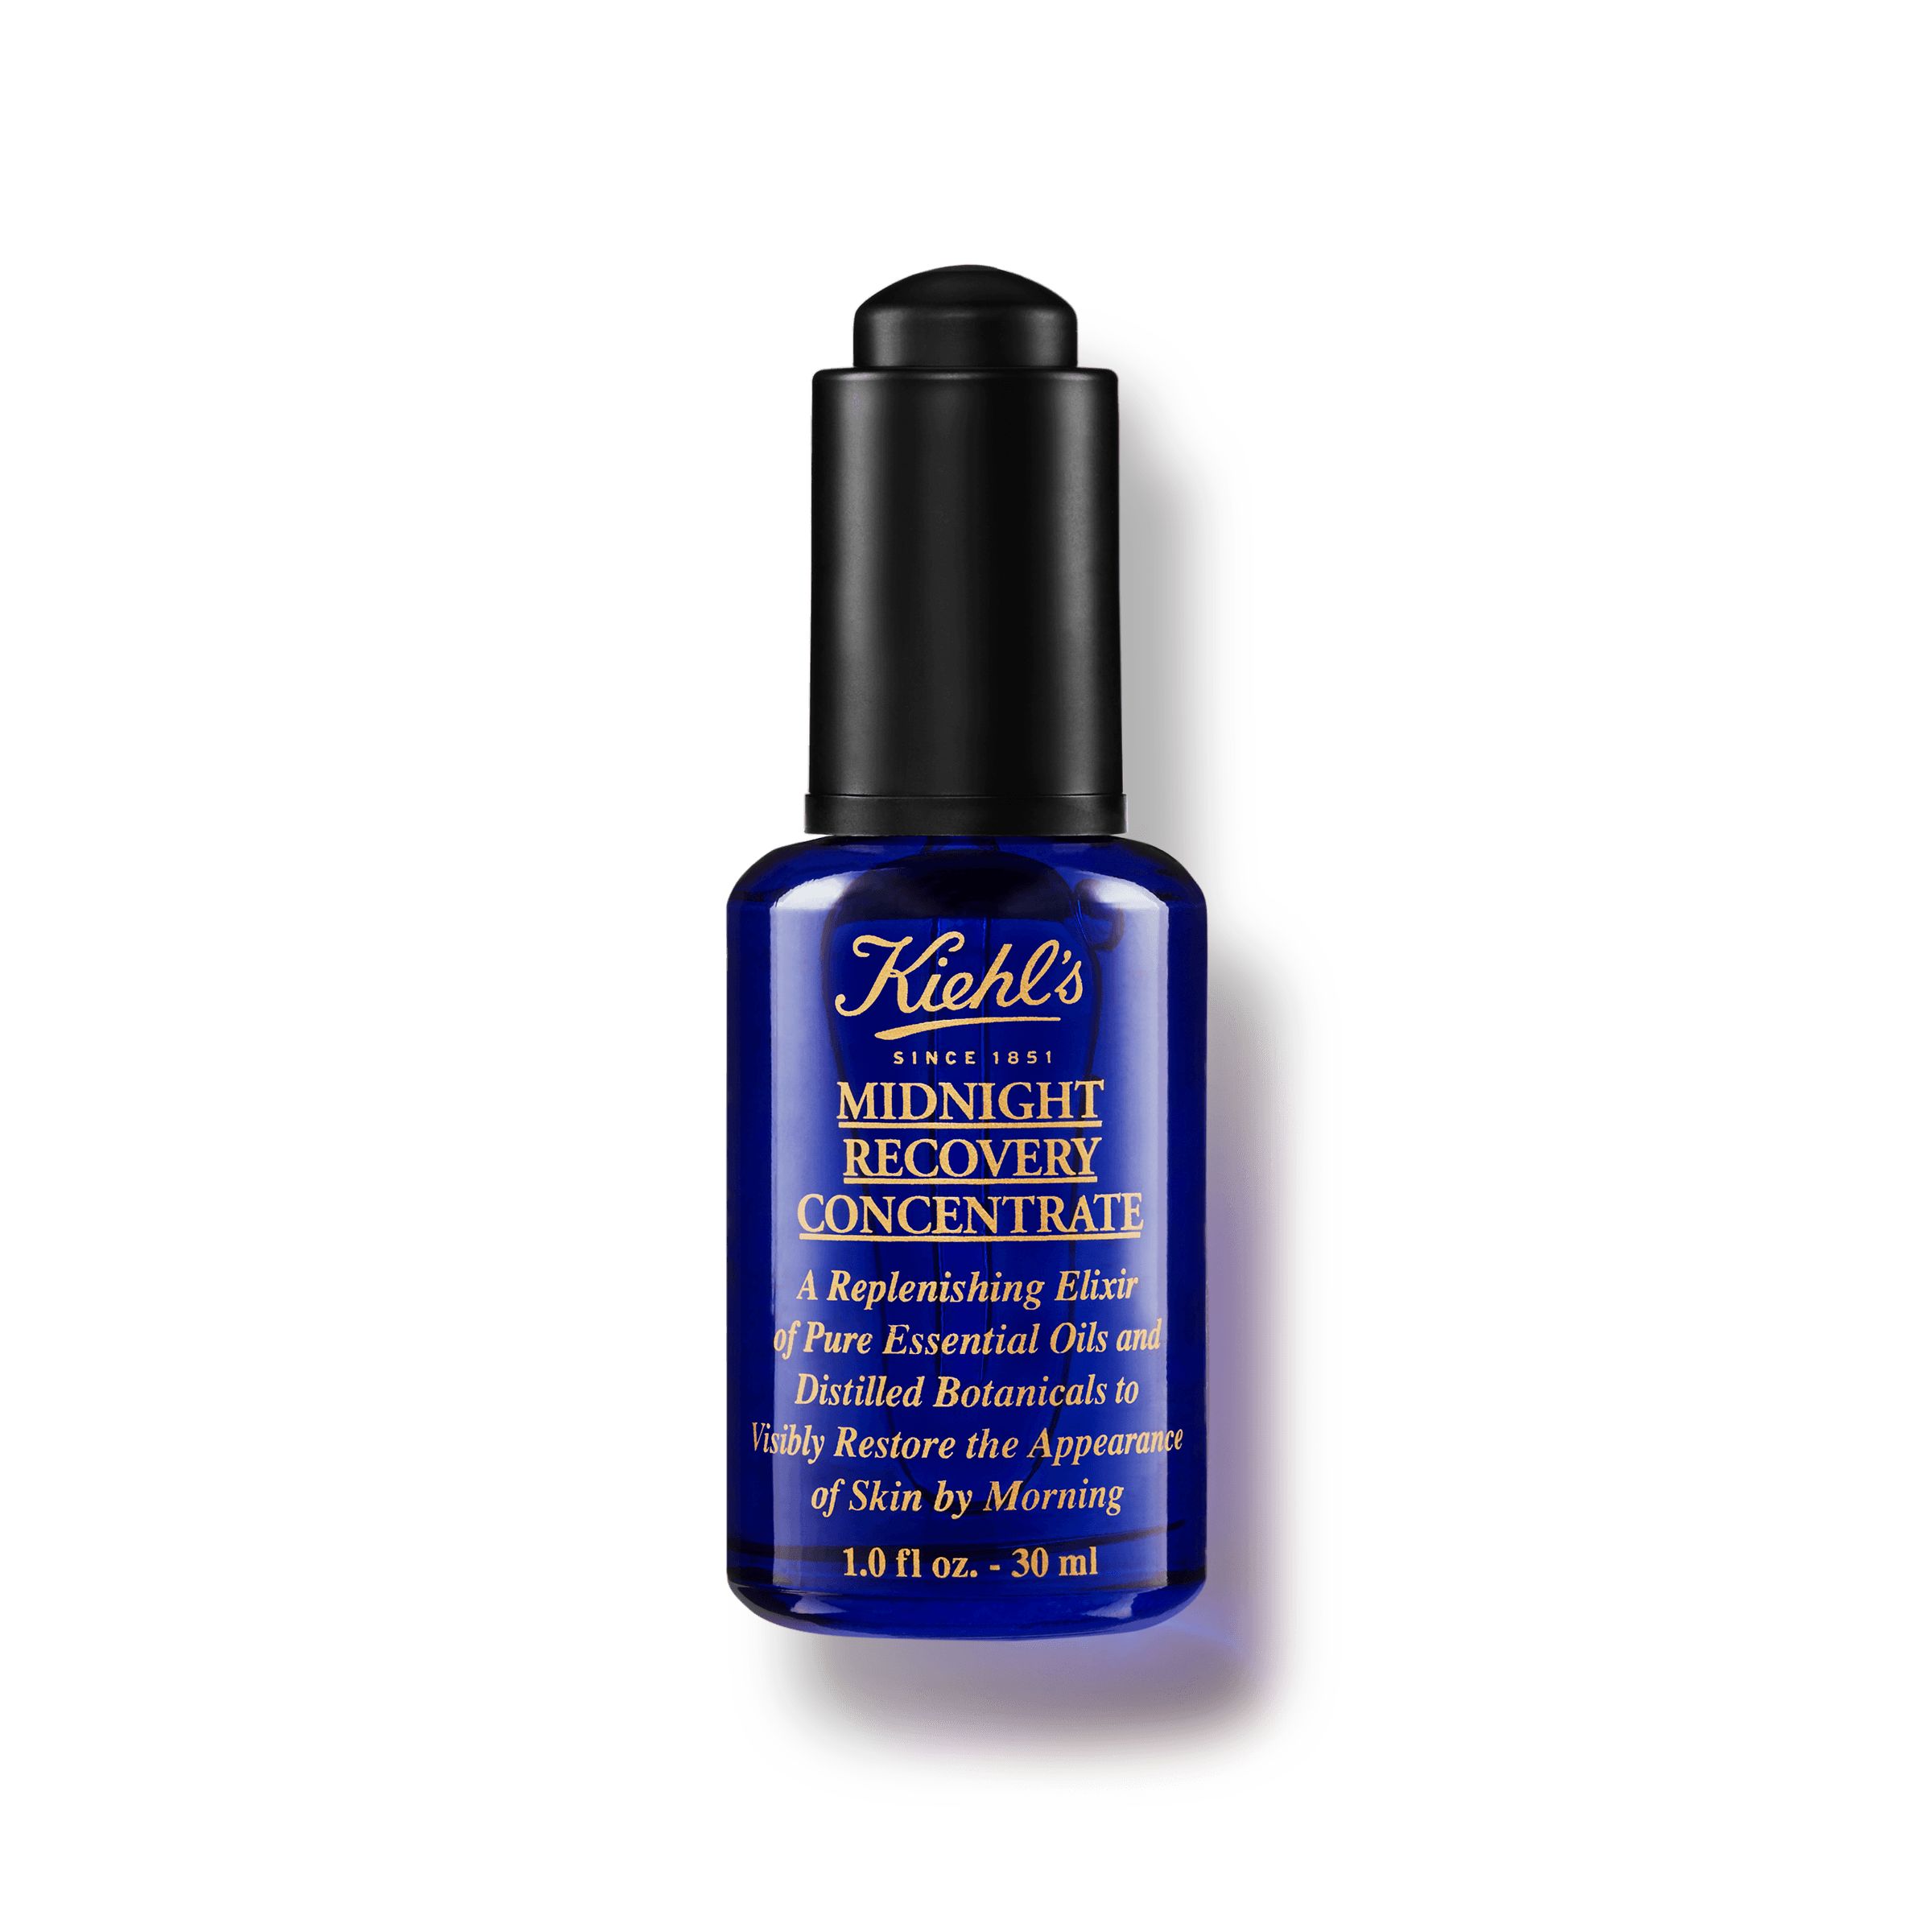 Midnight Recovery Concentrate | Facial Oil | Kiehl's UK | Kiehls (UK)